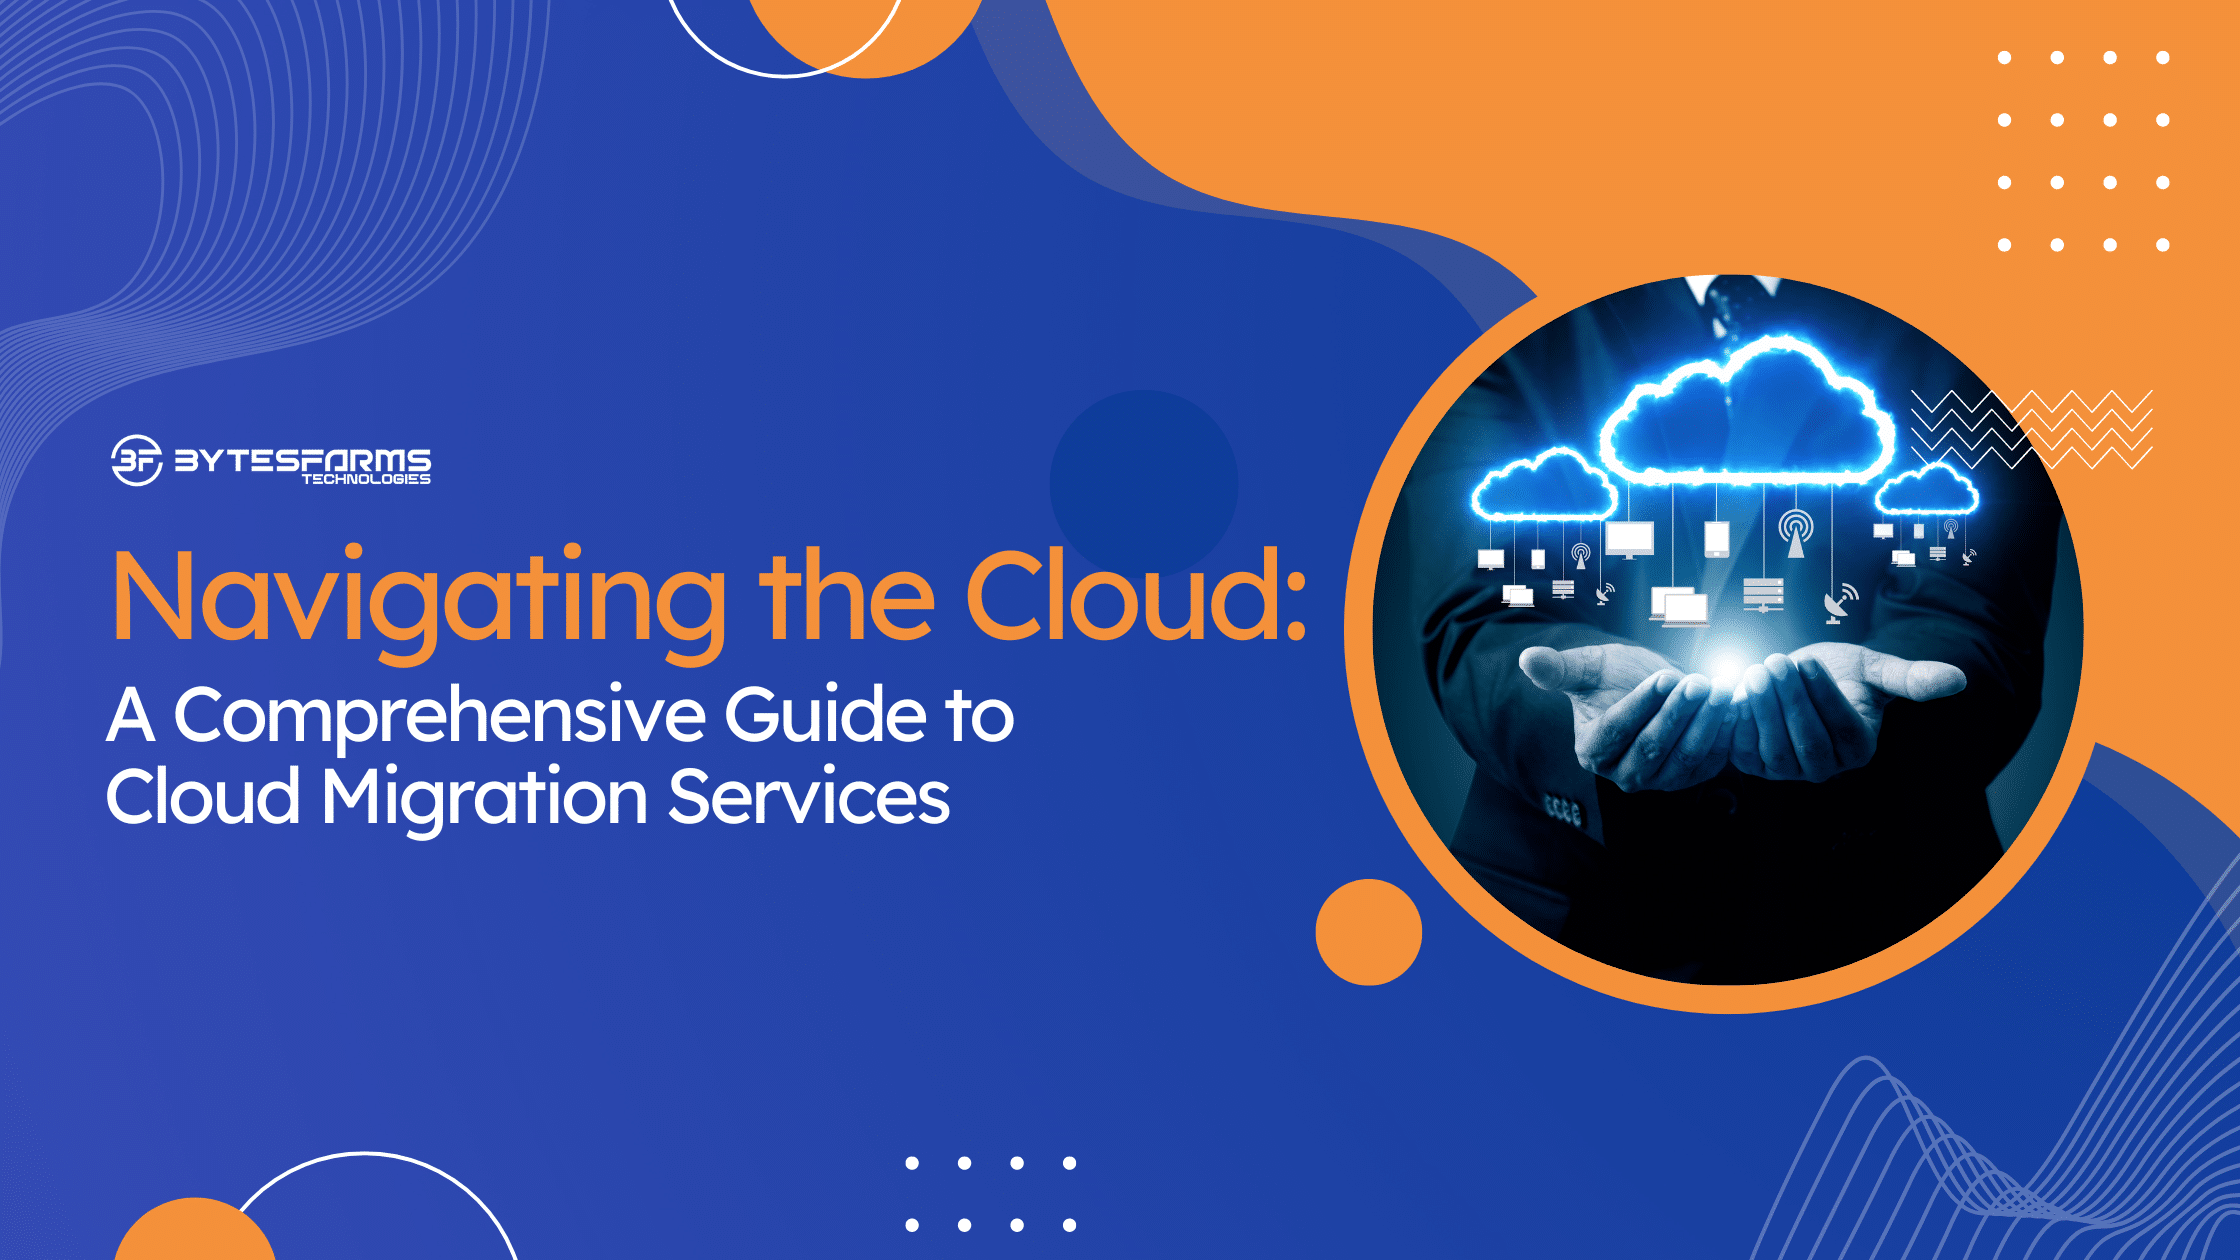 Navigating the Cloud: A Comprehensive Guide to Cloud Migration Services